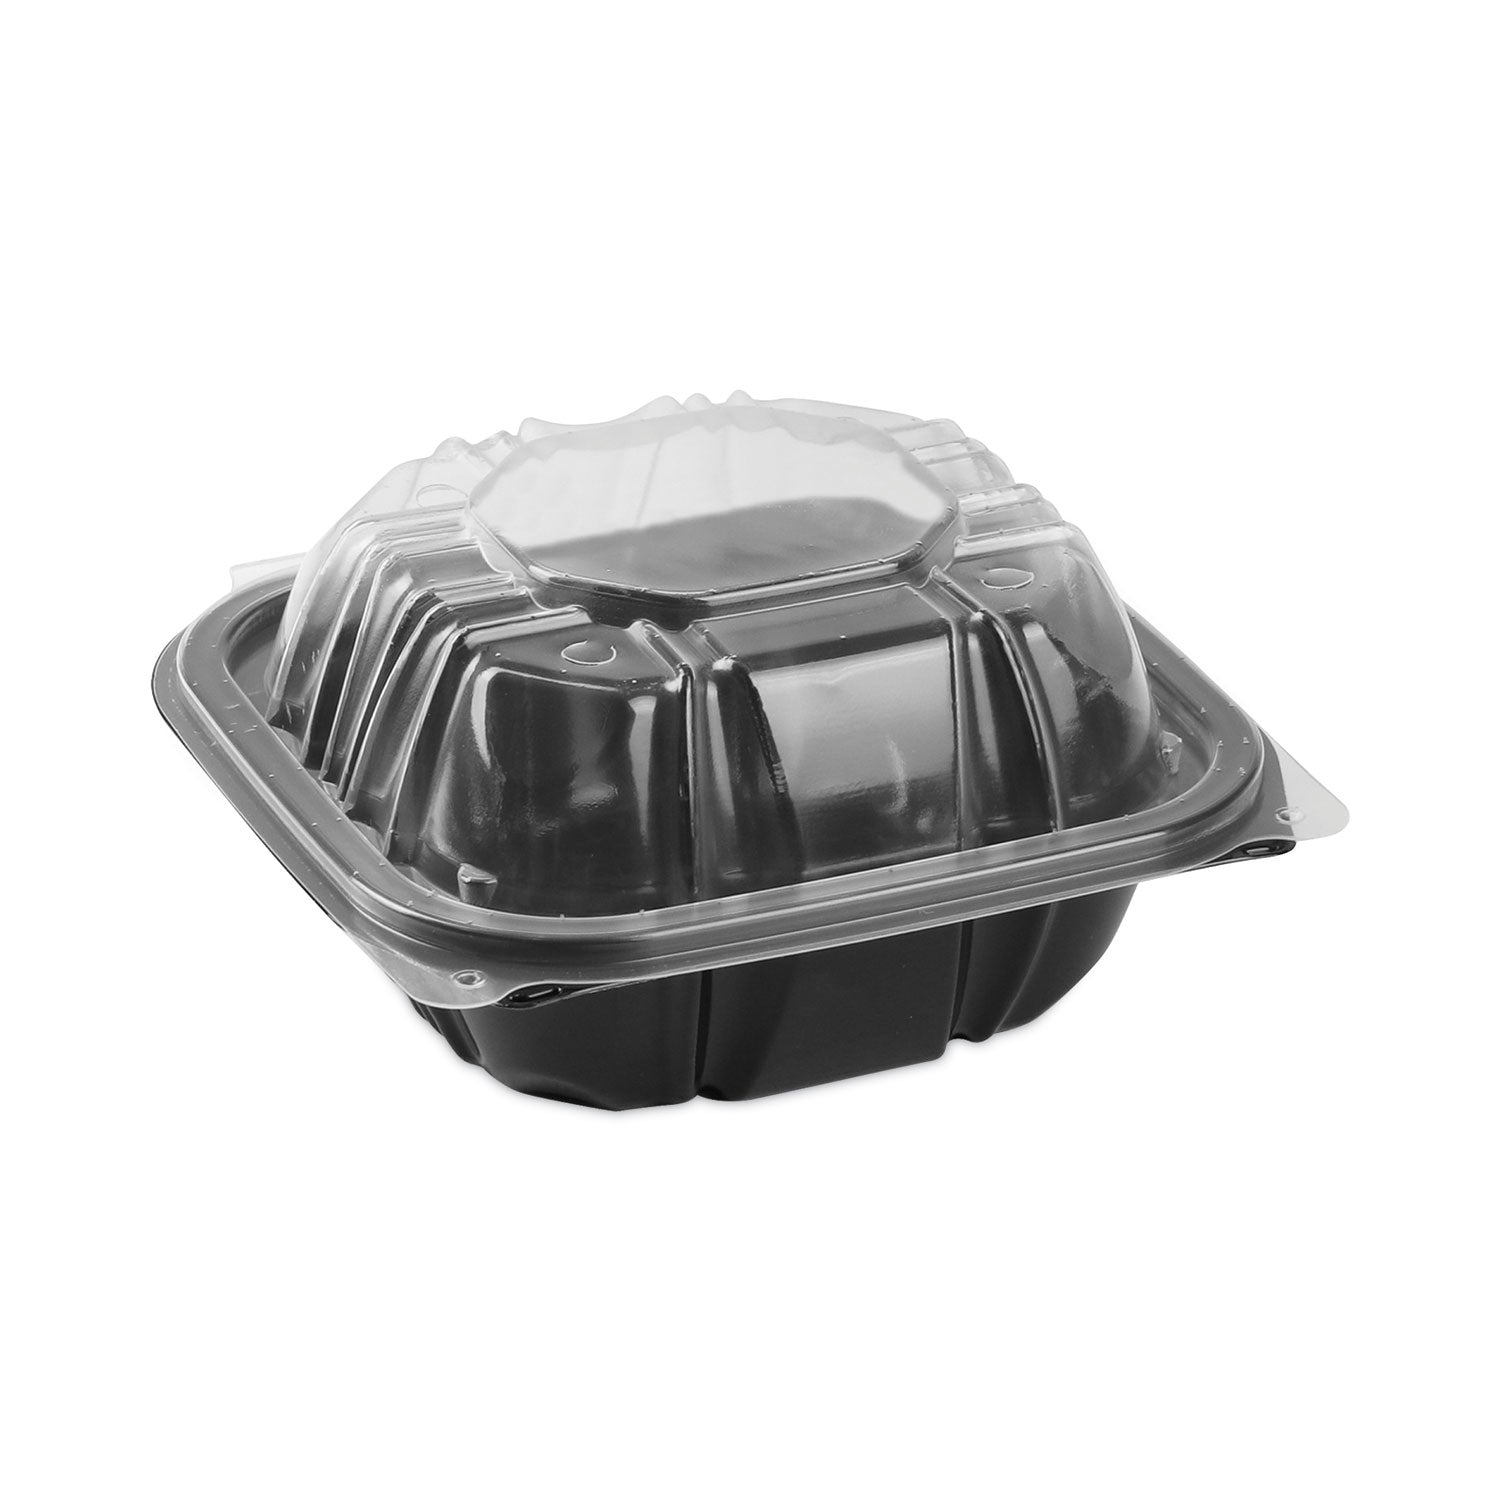 earthchoice-vented-dual-color-microwavable-hinged-lid-container-1-compartment-16oz-6-x-6-x-3-black-clear-plastic-321-ct_pctdc6610b000 - 1